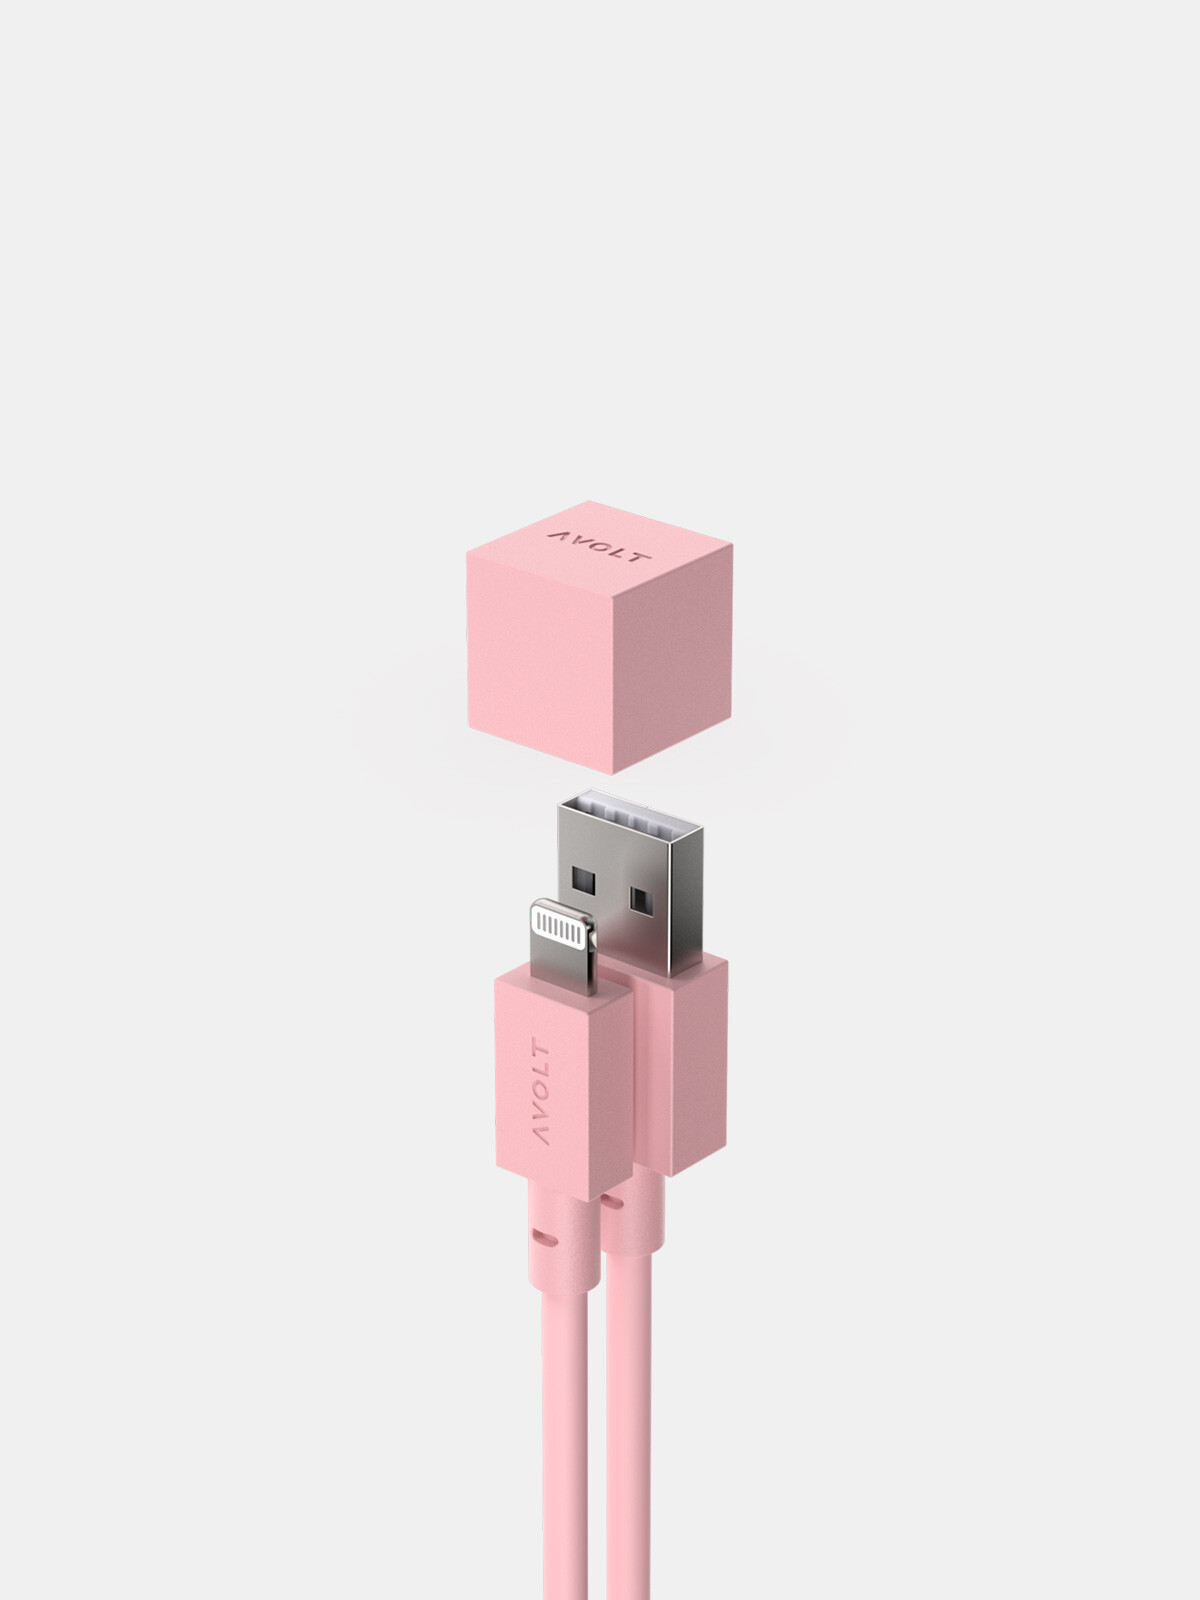 Cable 1 usb a to lightning, 1. ROSA